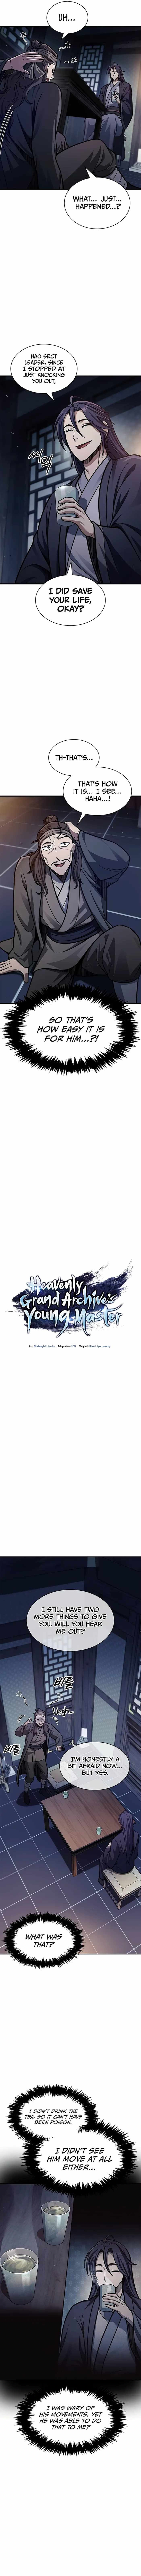 Heavenly Grand Archive’s Young Master Chapter 64